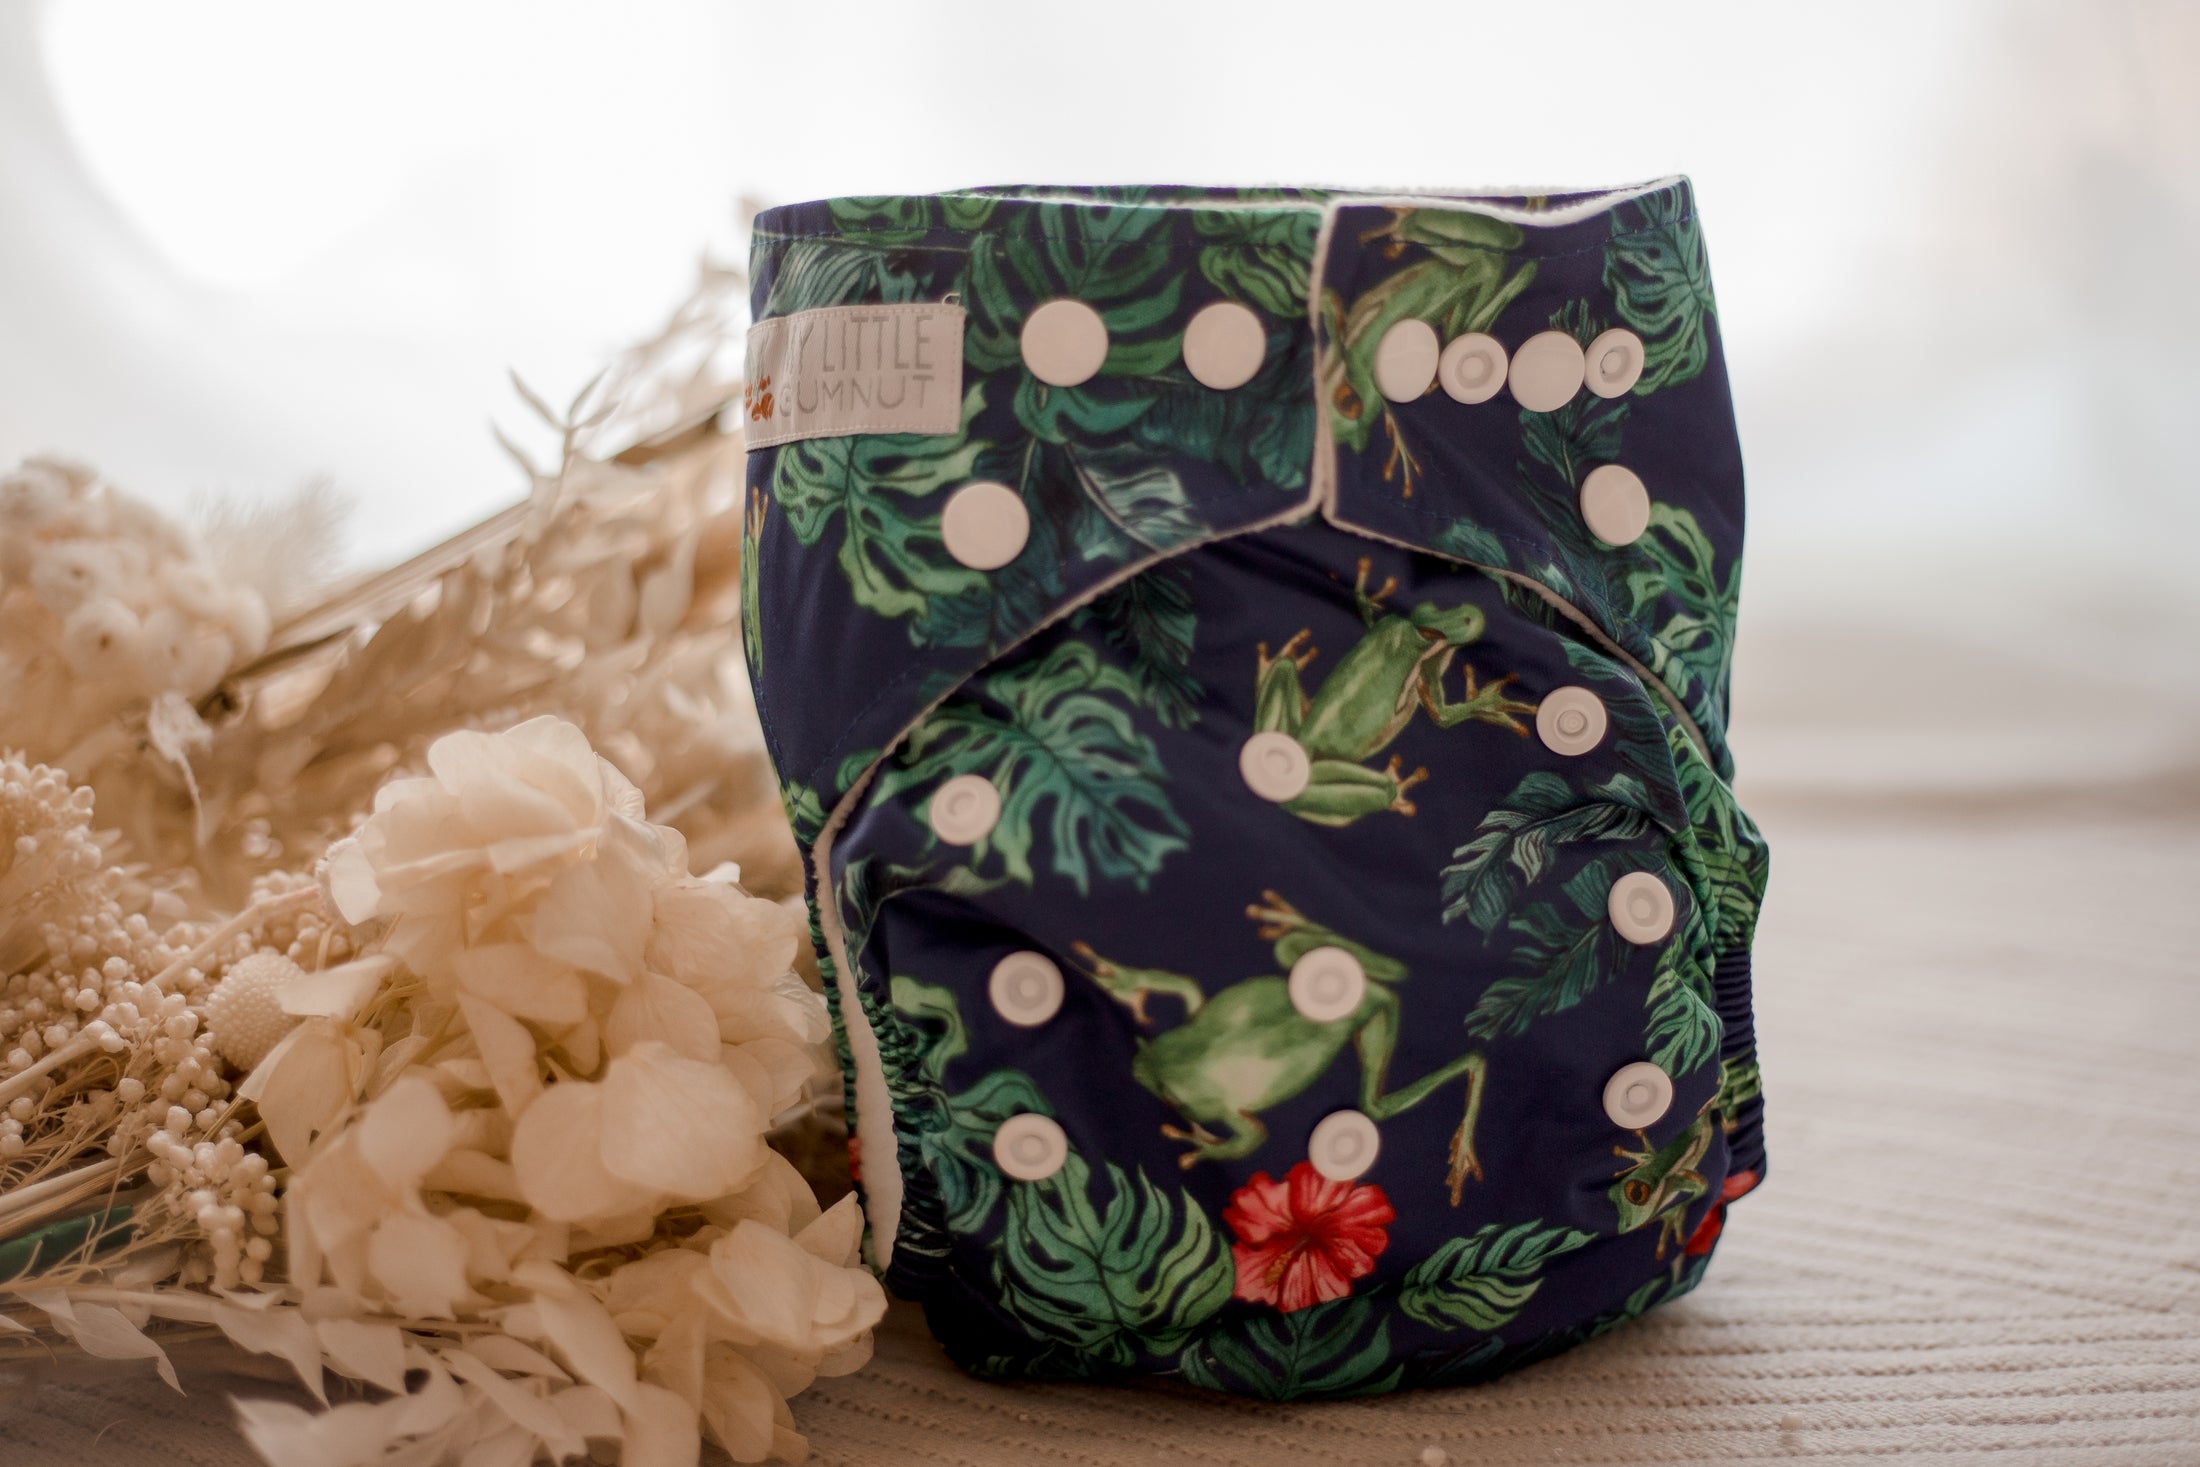 modern cloth nappies by my little gumnut. reusable cloth nappies. cloth nappies australia. tropical frogs cloth nappy. 